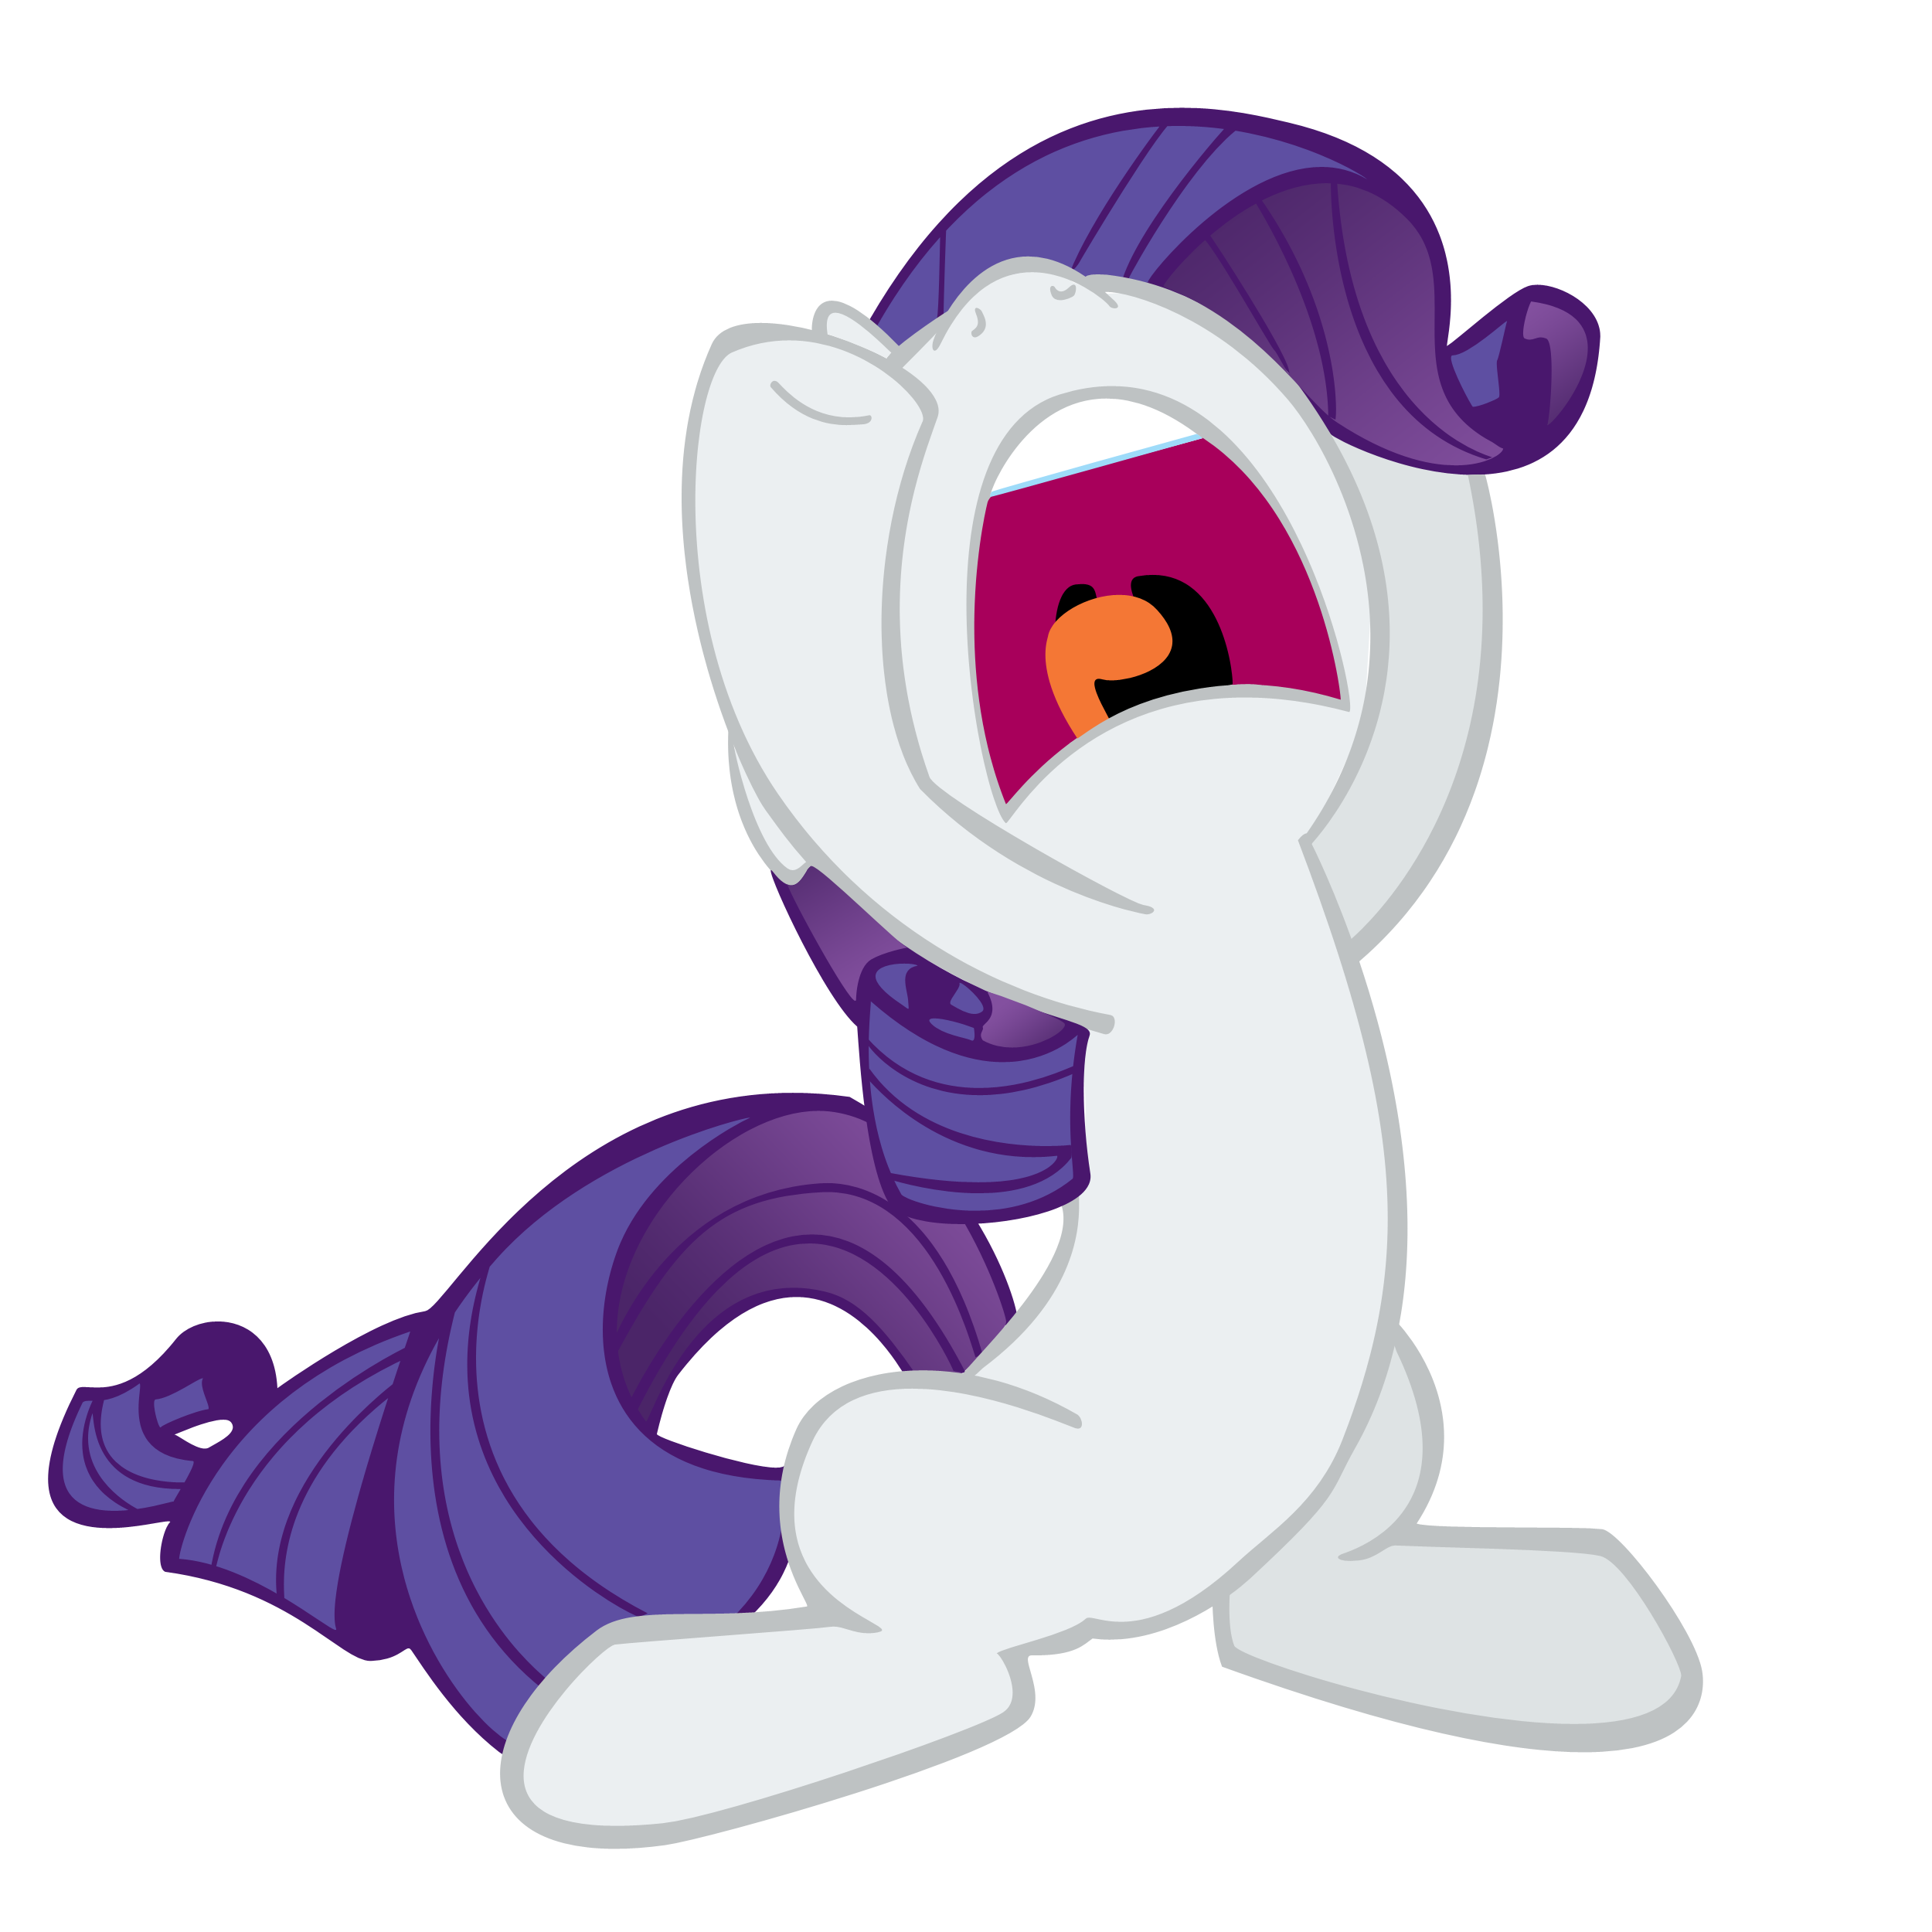 rarity_screaming_by_ajdispirito-d537oas.